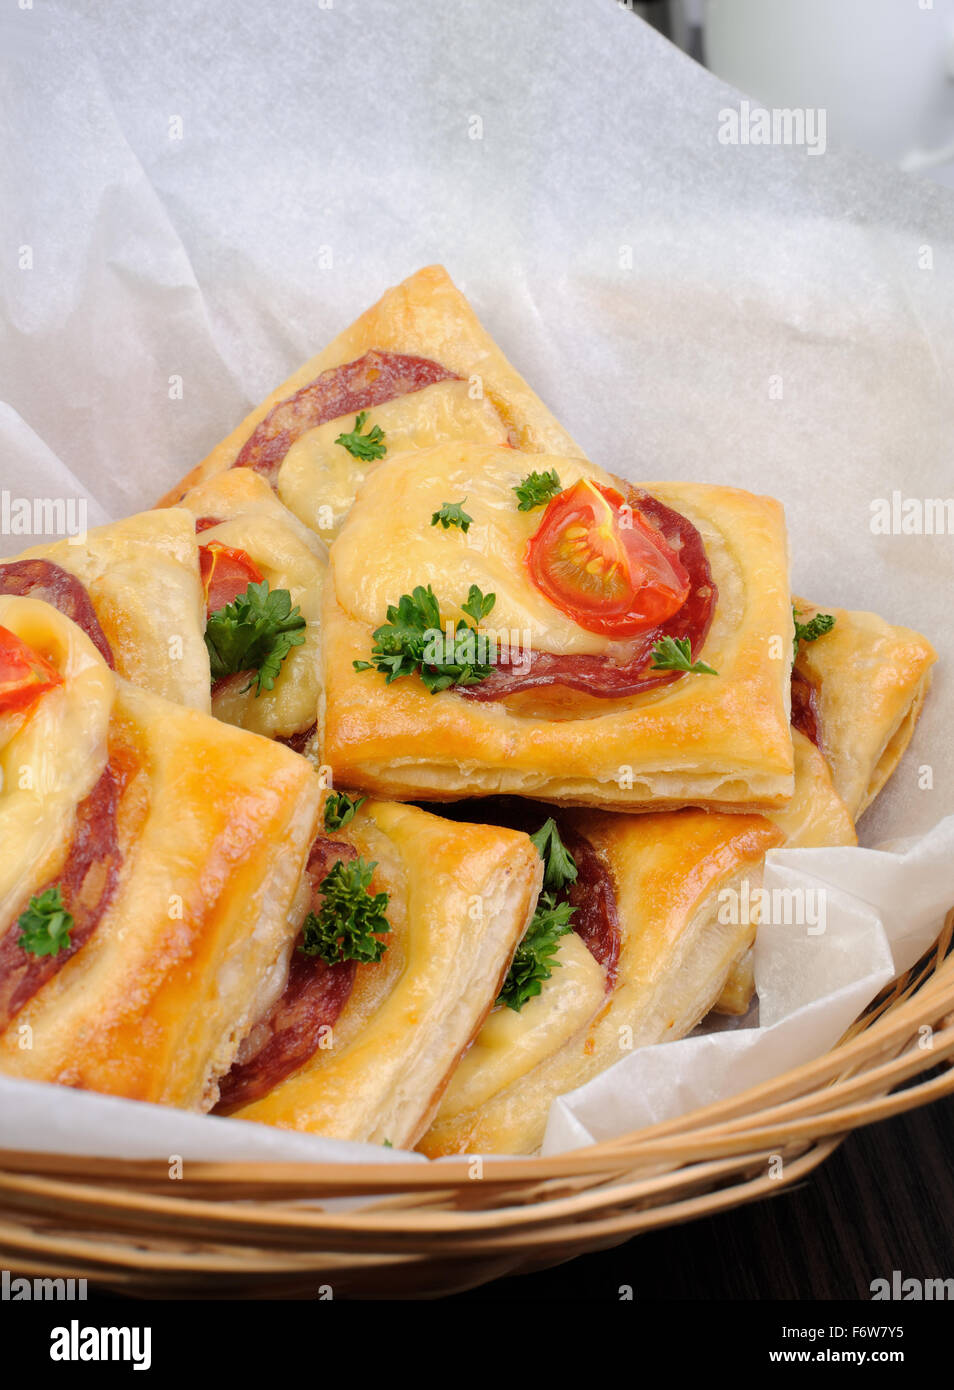 Appetizer of puff pastry with salami, cheese and cherry tomatoes Stock Photo